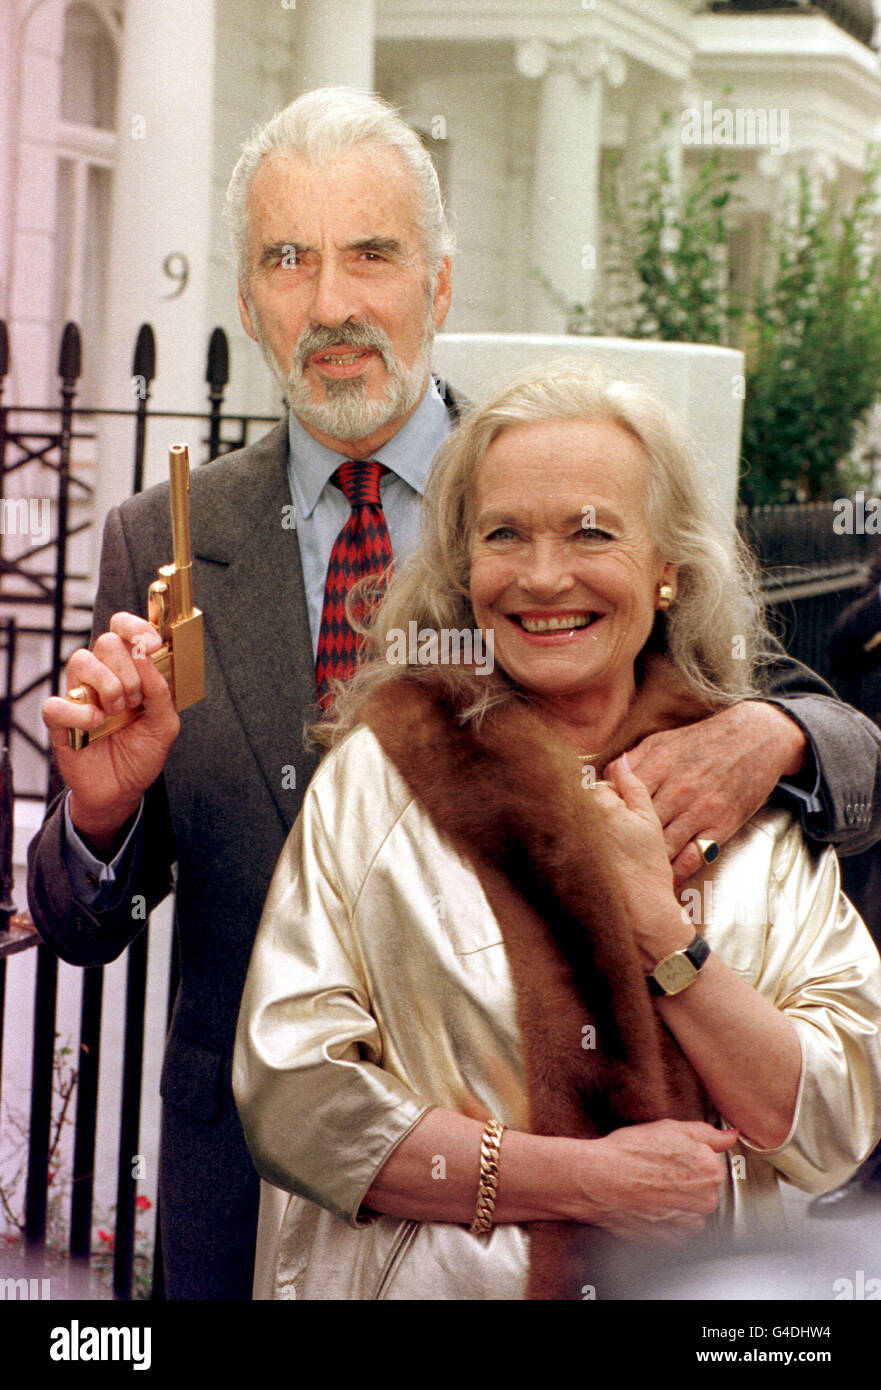 PA NEWS PHOTO 17/7/98 ACTOR CHRISTOPHER LEE, WHO PLAYED VILLAIN SCARAMANGA IN 'THE MAN WITH THE GOLDEN GUN', AND SHIRLEY EATON, WHO PLAYED JAMES BOND'S LOVER IN 'GOLDFINGER', VISITED CHRISTIE'S SALE ROOM IN CENTRAL LONDON IN ADVANCE OF THE FORTHCOMING BOND AUCTION (17/9/98). Stock Photo